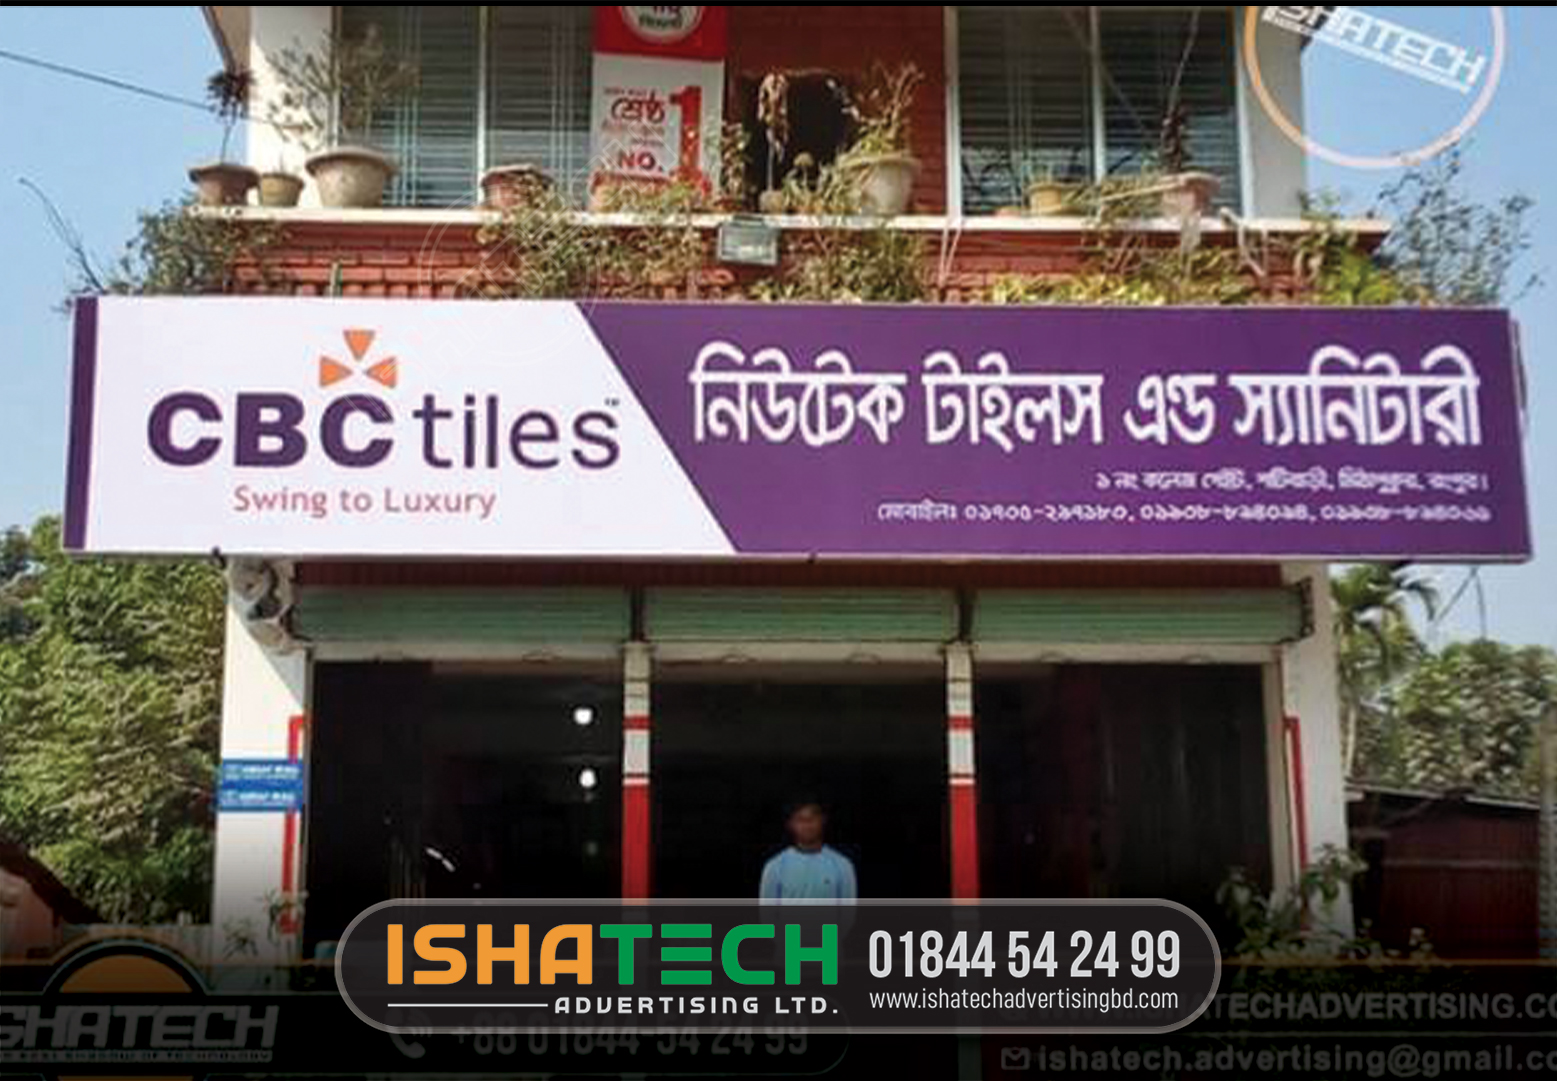 CBC TILES NEWTECH TILES AND SANETERY SHOP BILLBOARD, PANAFLEX SIGNBOARD MAKER DHAKA, SIGNAGE AGENCY IN BANGLADESH